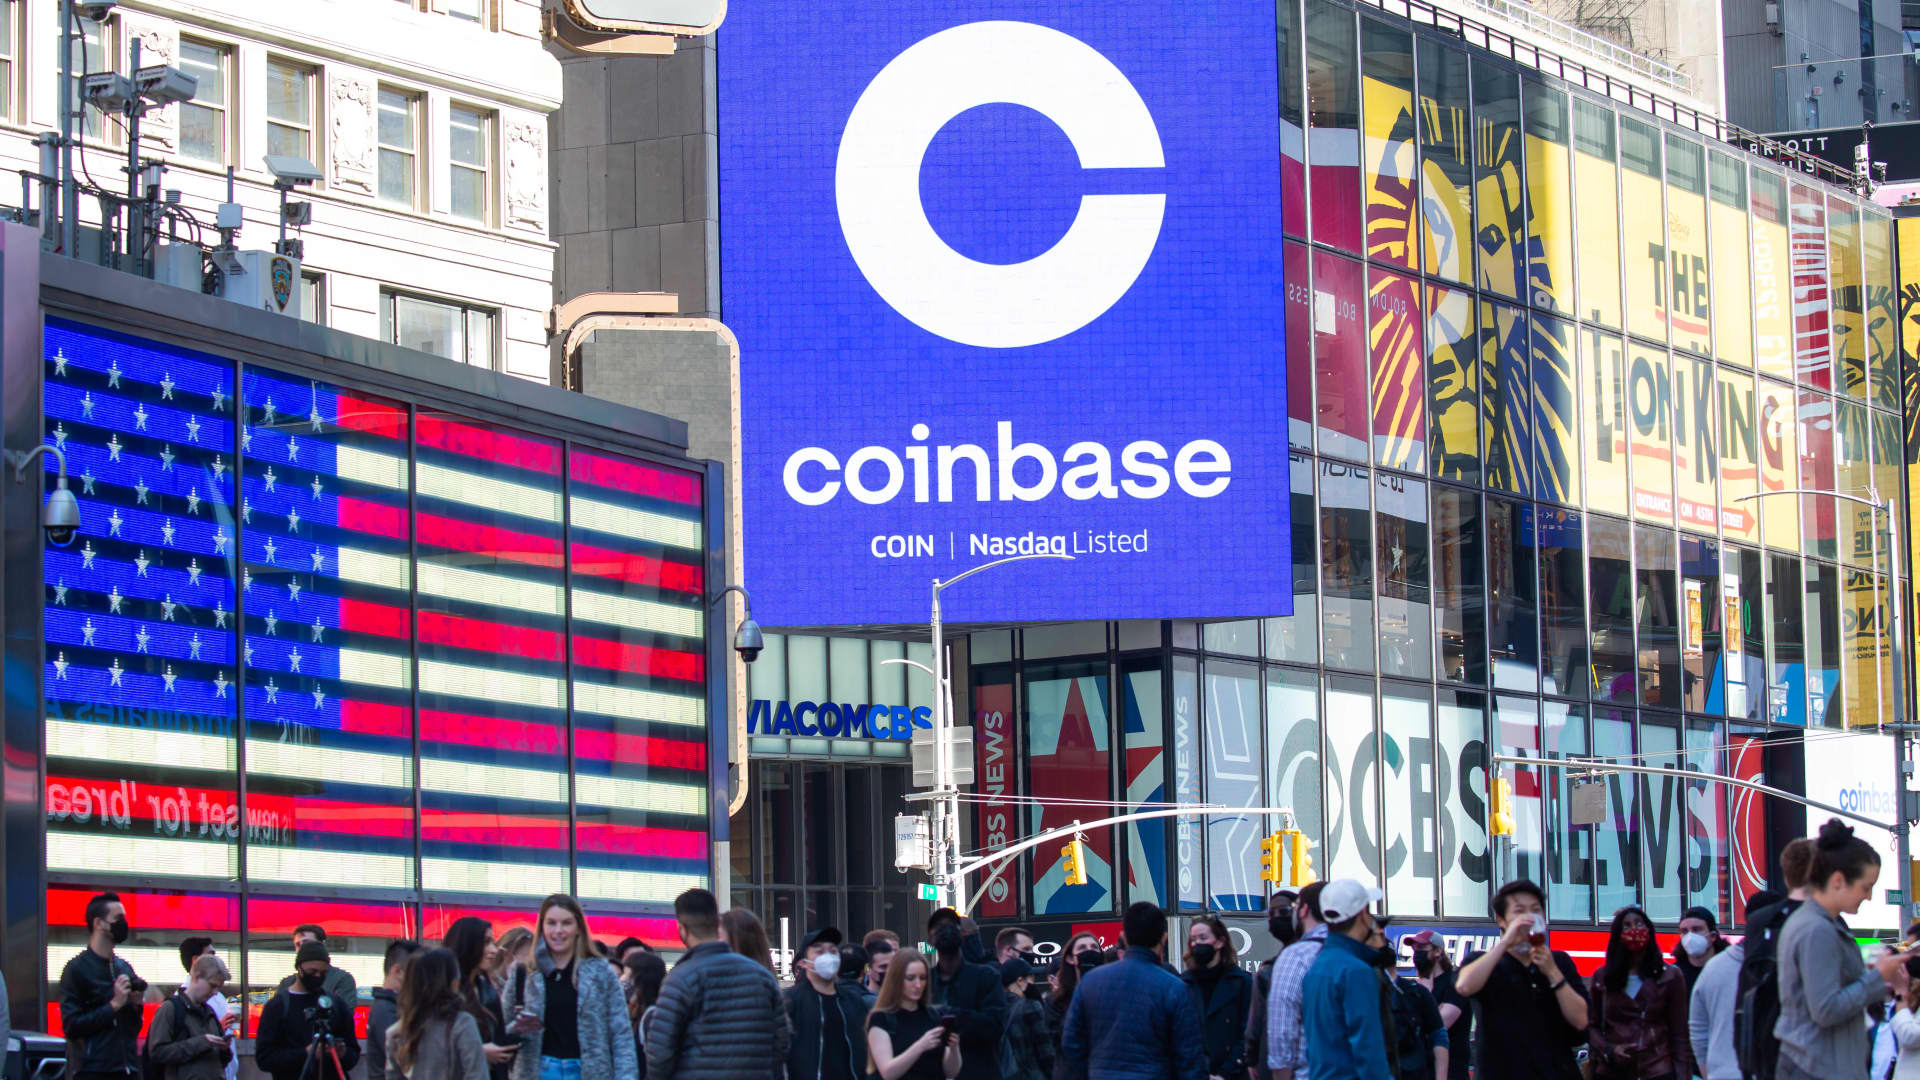 Monitors display Coinbase signage during the company's initial public offering (IPO) at the Nasdaq MarketSite in New York, on Wednesday, April 14, 2021.